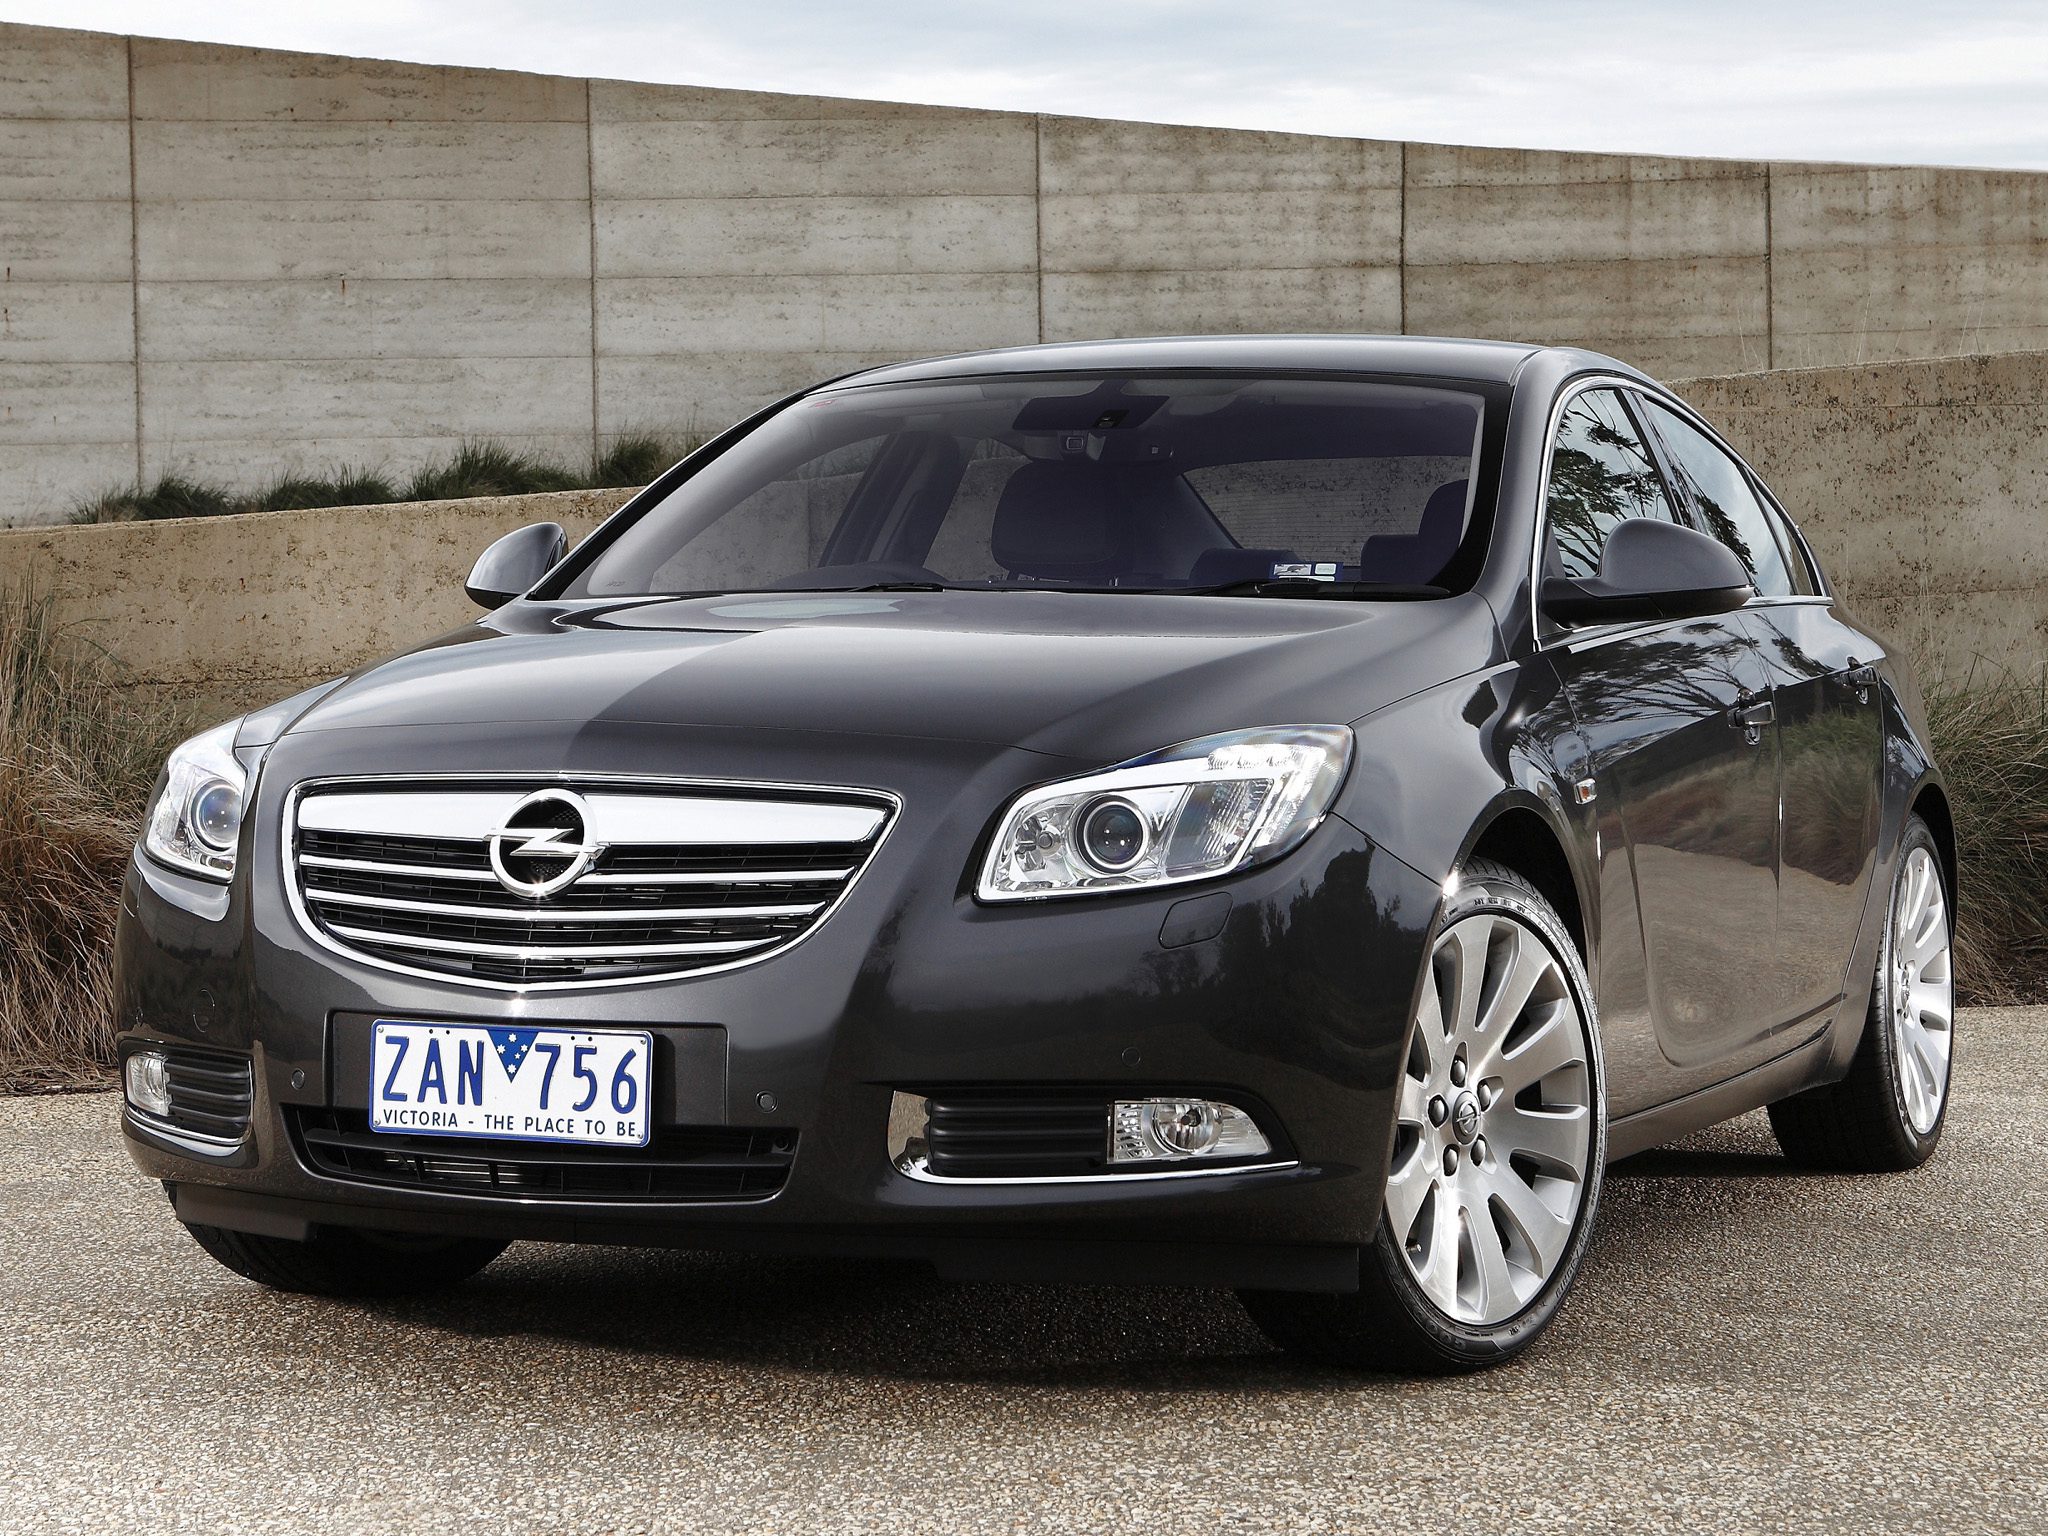 Opel Insignia picture. Opel photo gallery